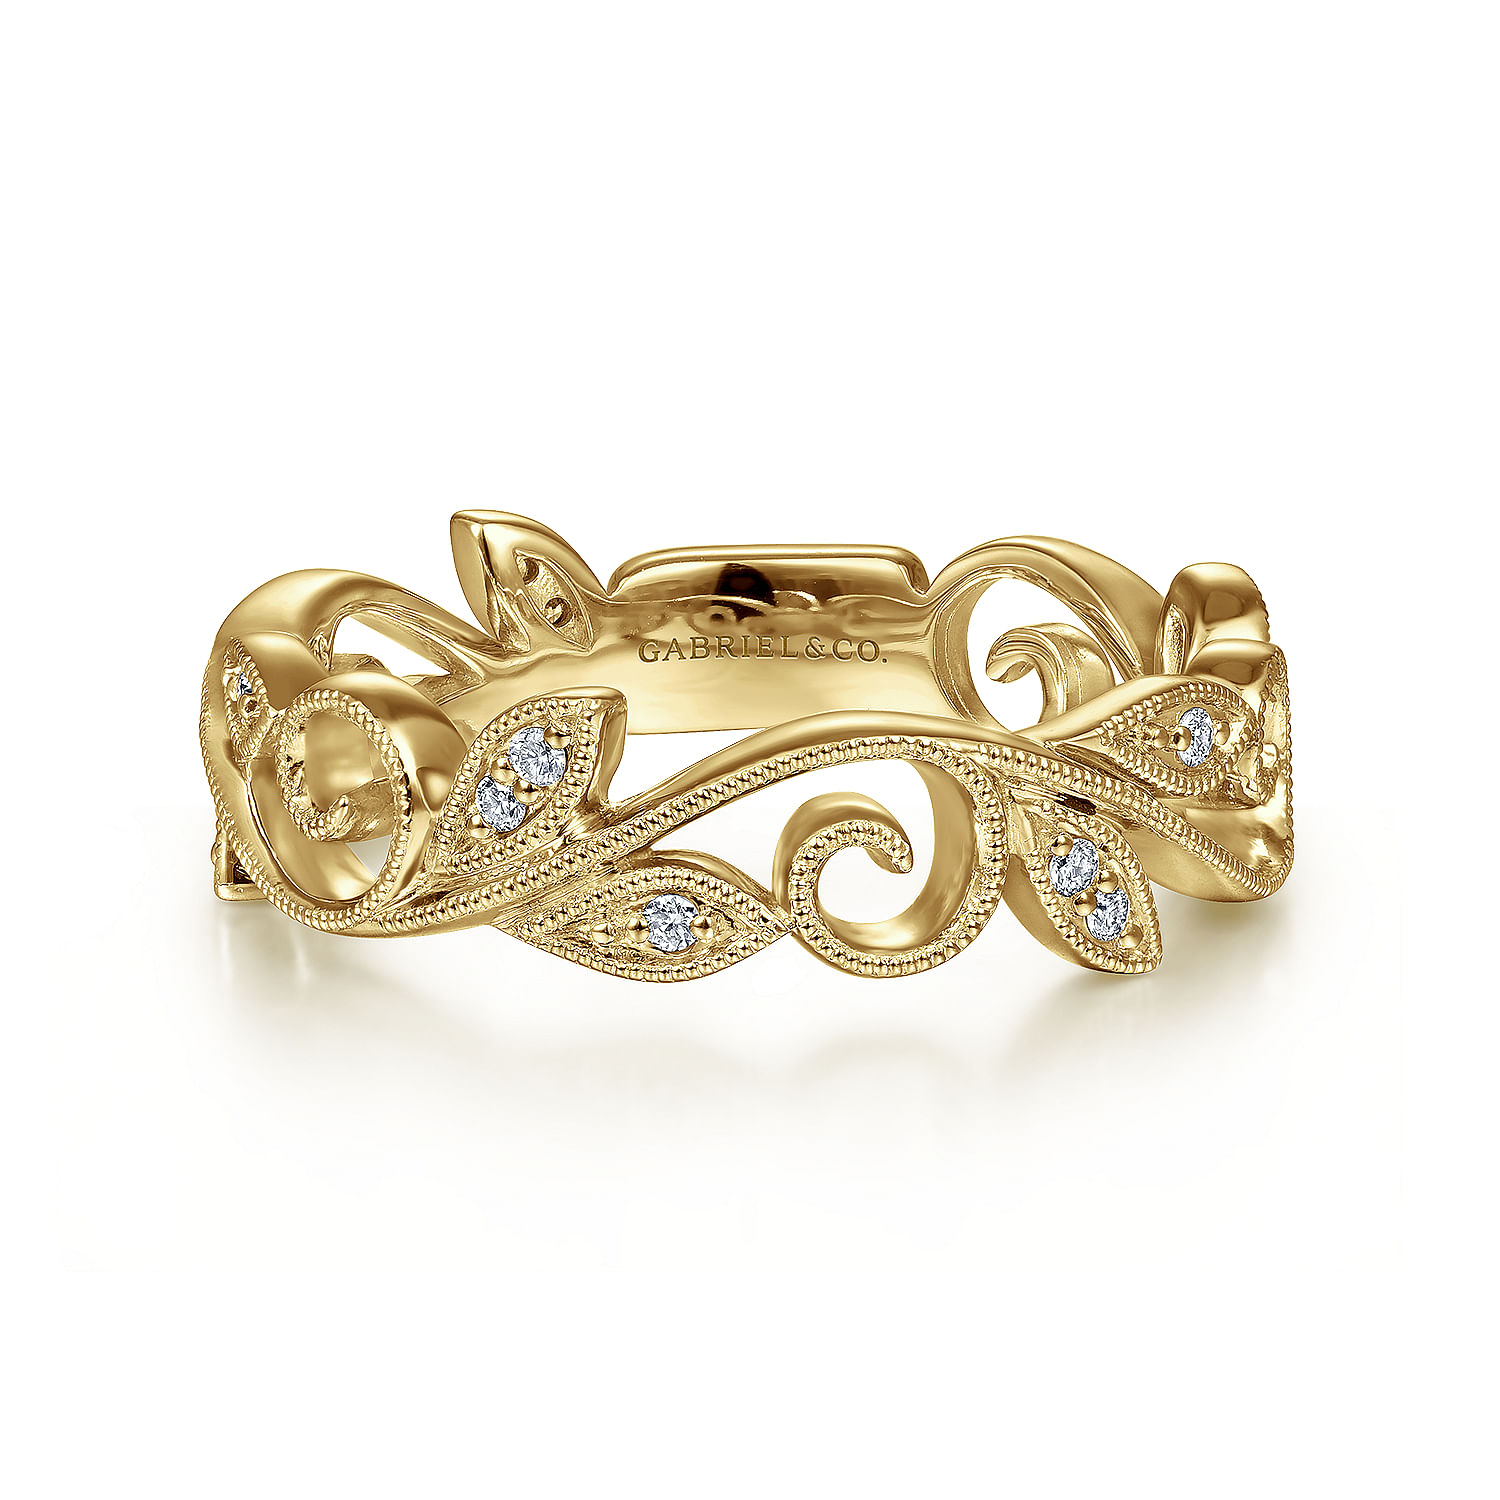 14K-Yellow-Gold-Scrolling-Floral-Diamond-Stackable-Ring1